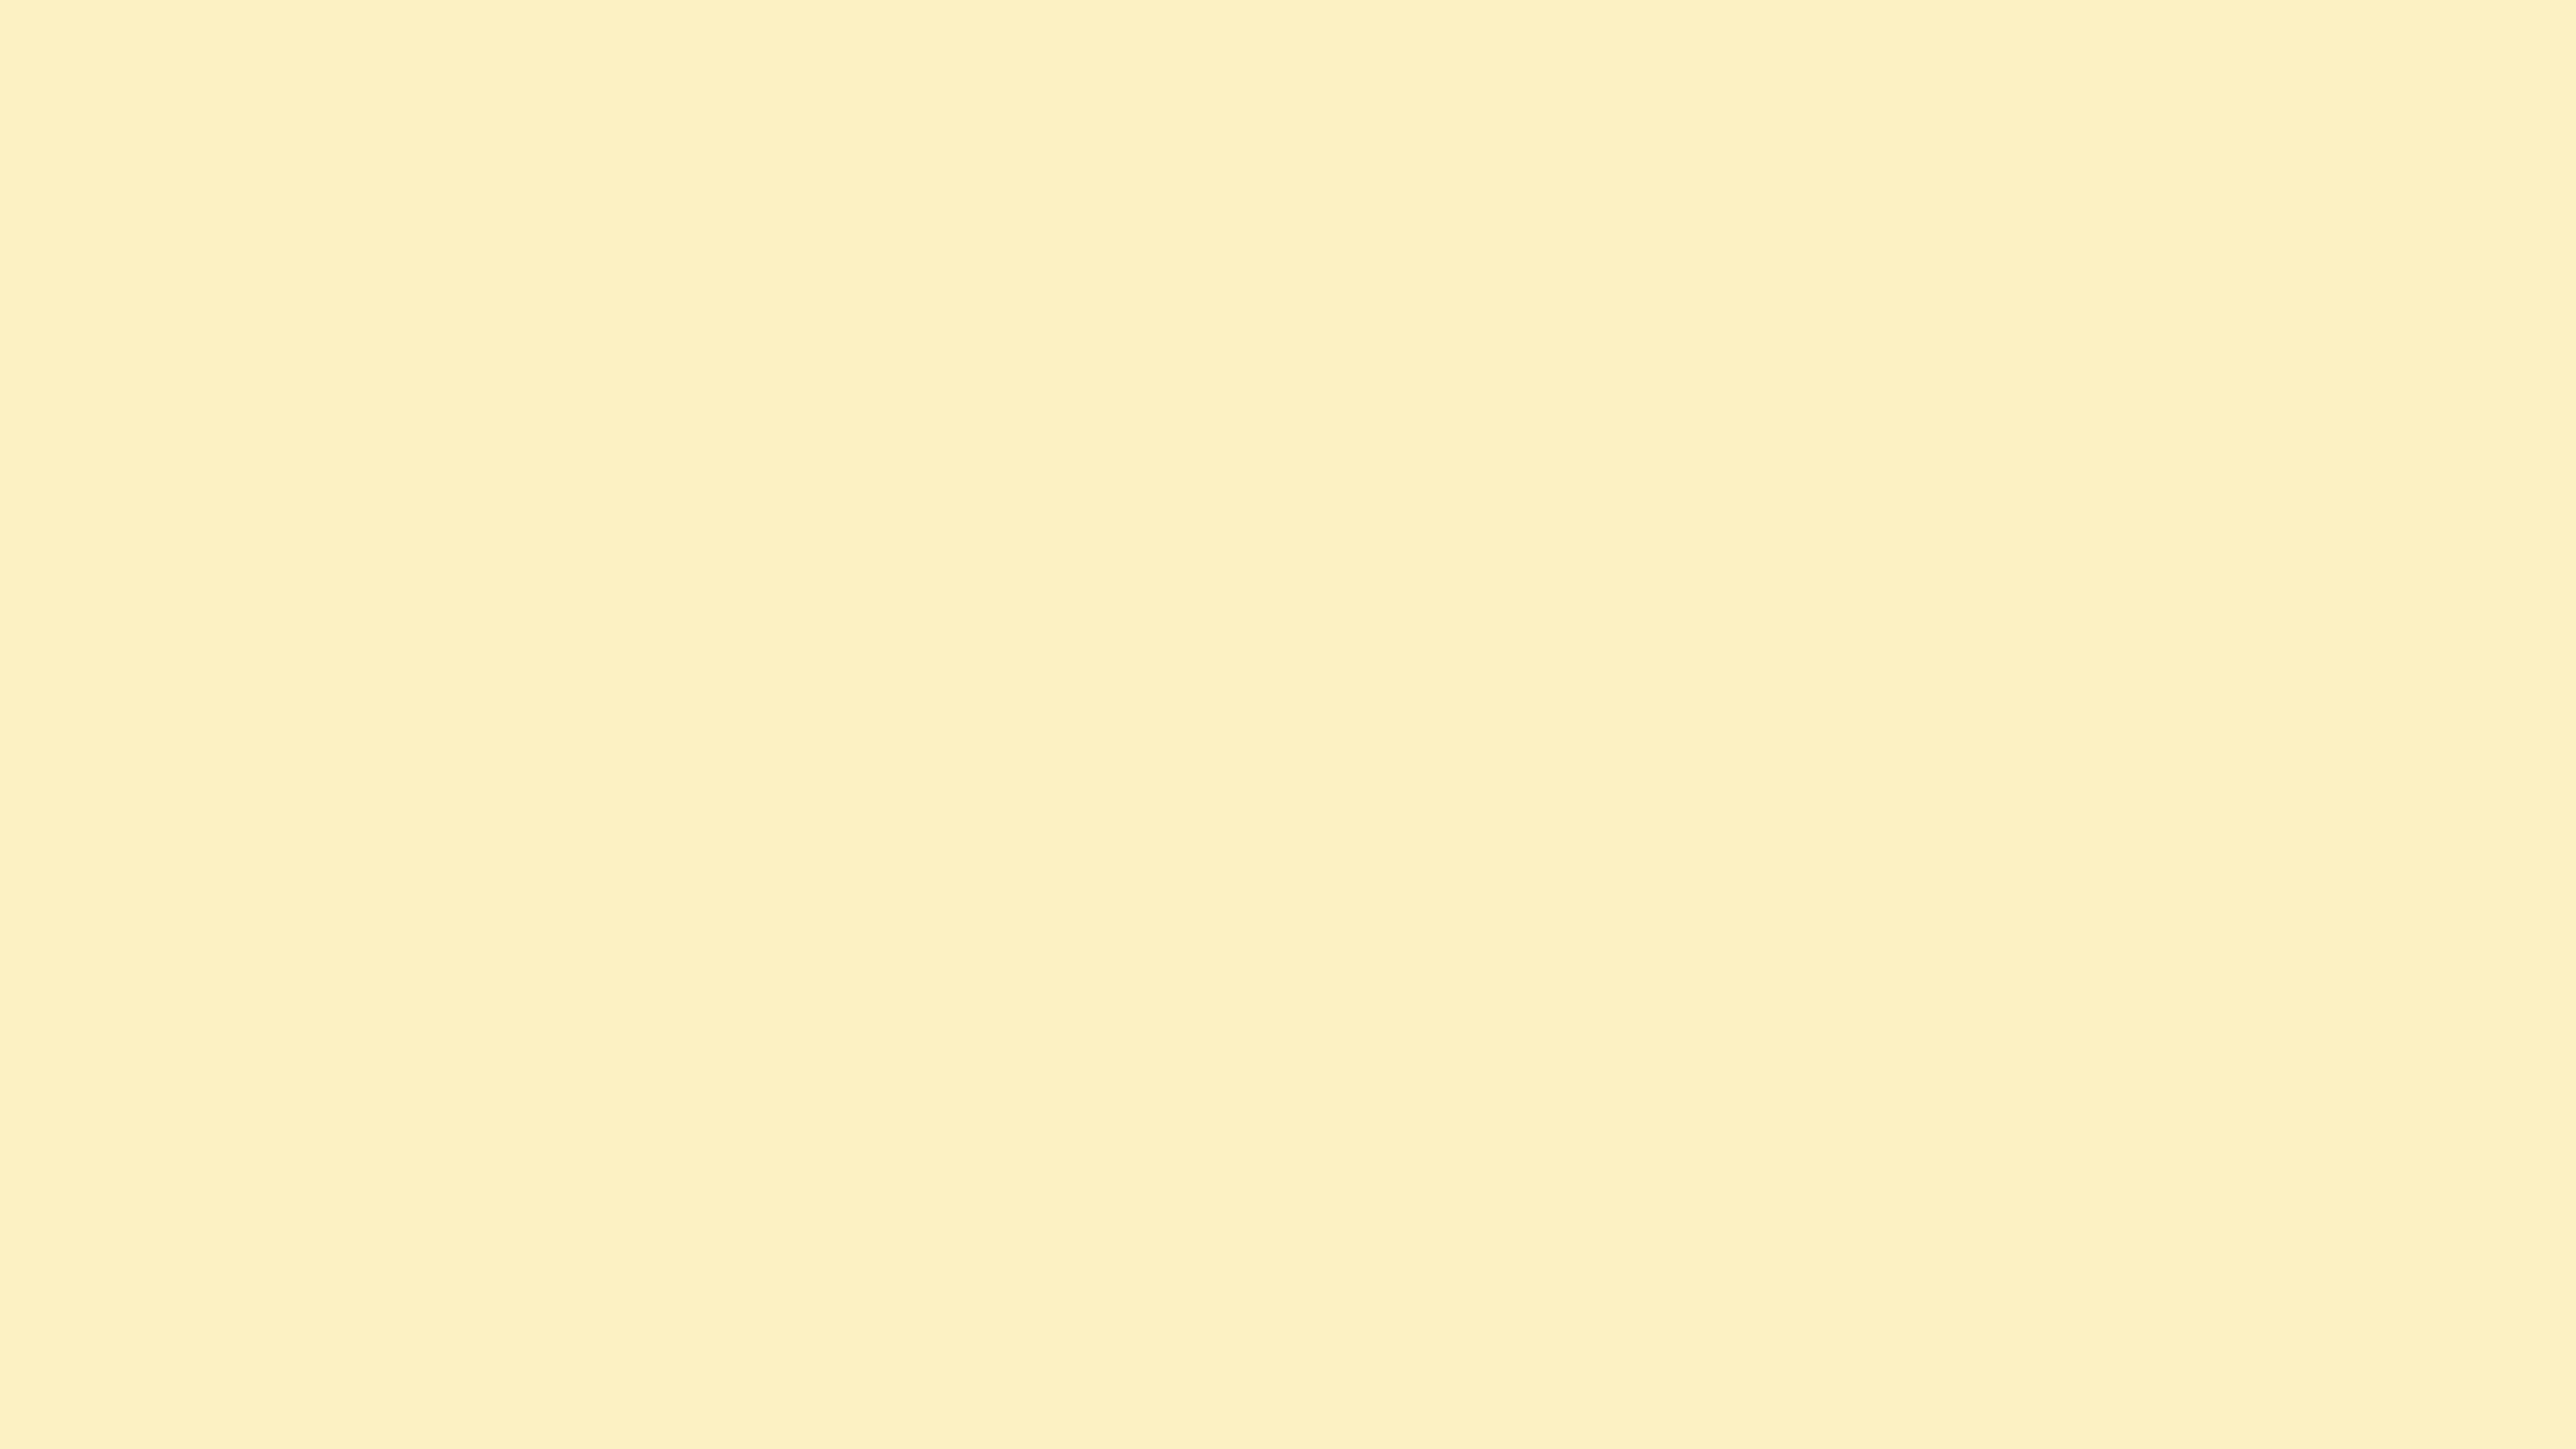 Amarillo Yellow Solid Color Background Image | Free Image Generator